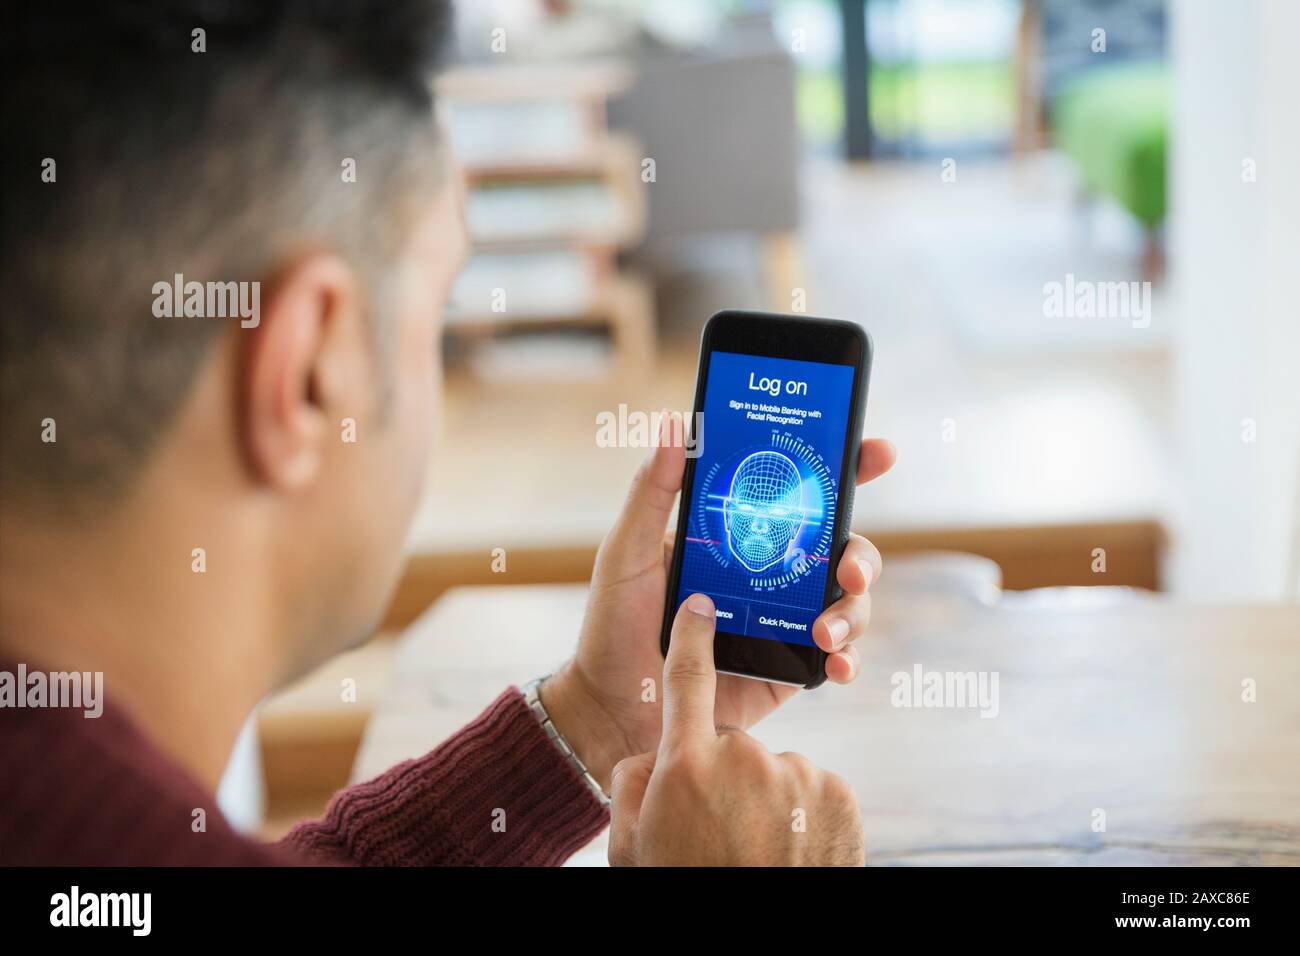 Man logging on to smart phone with facial recognition Stock Photo